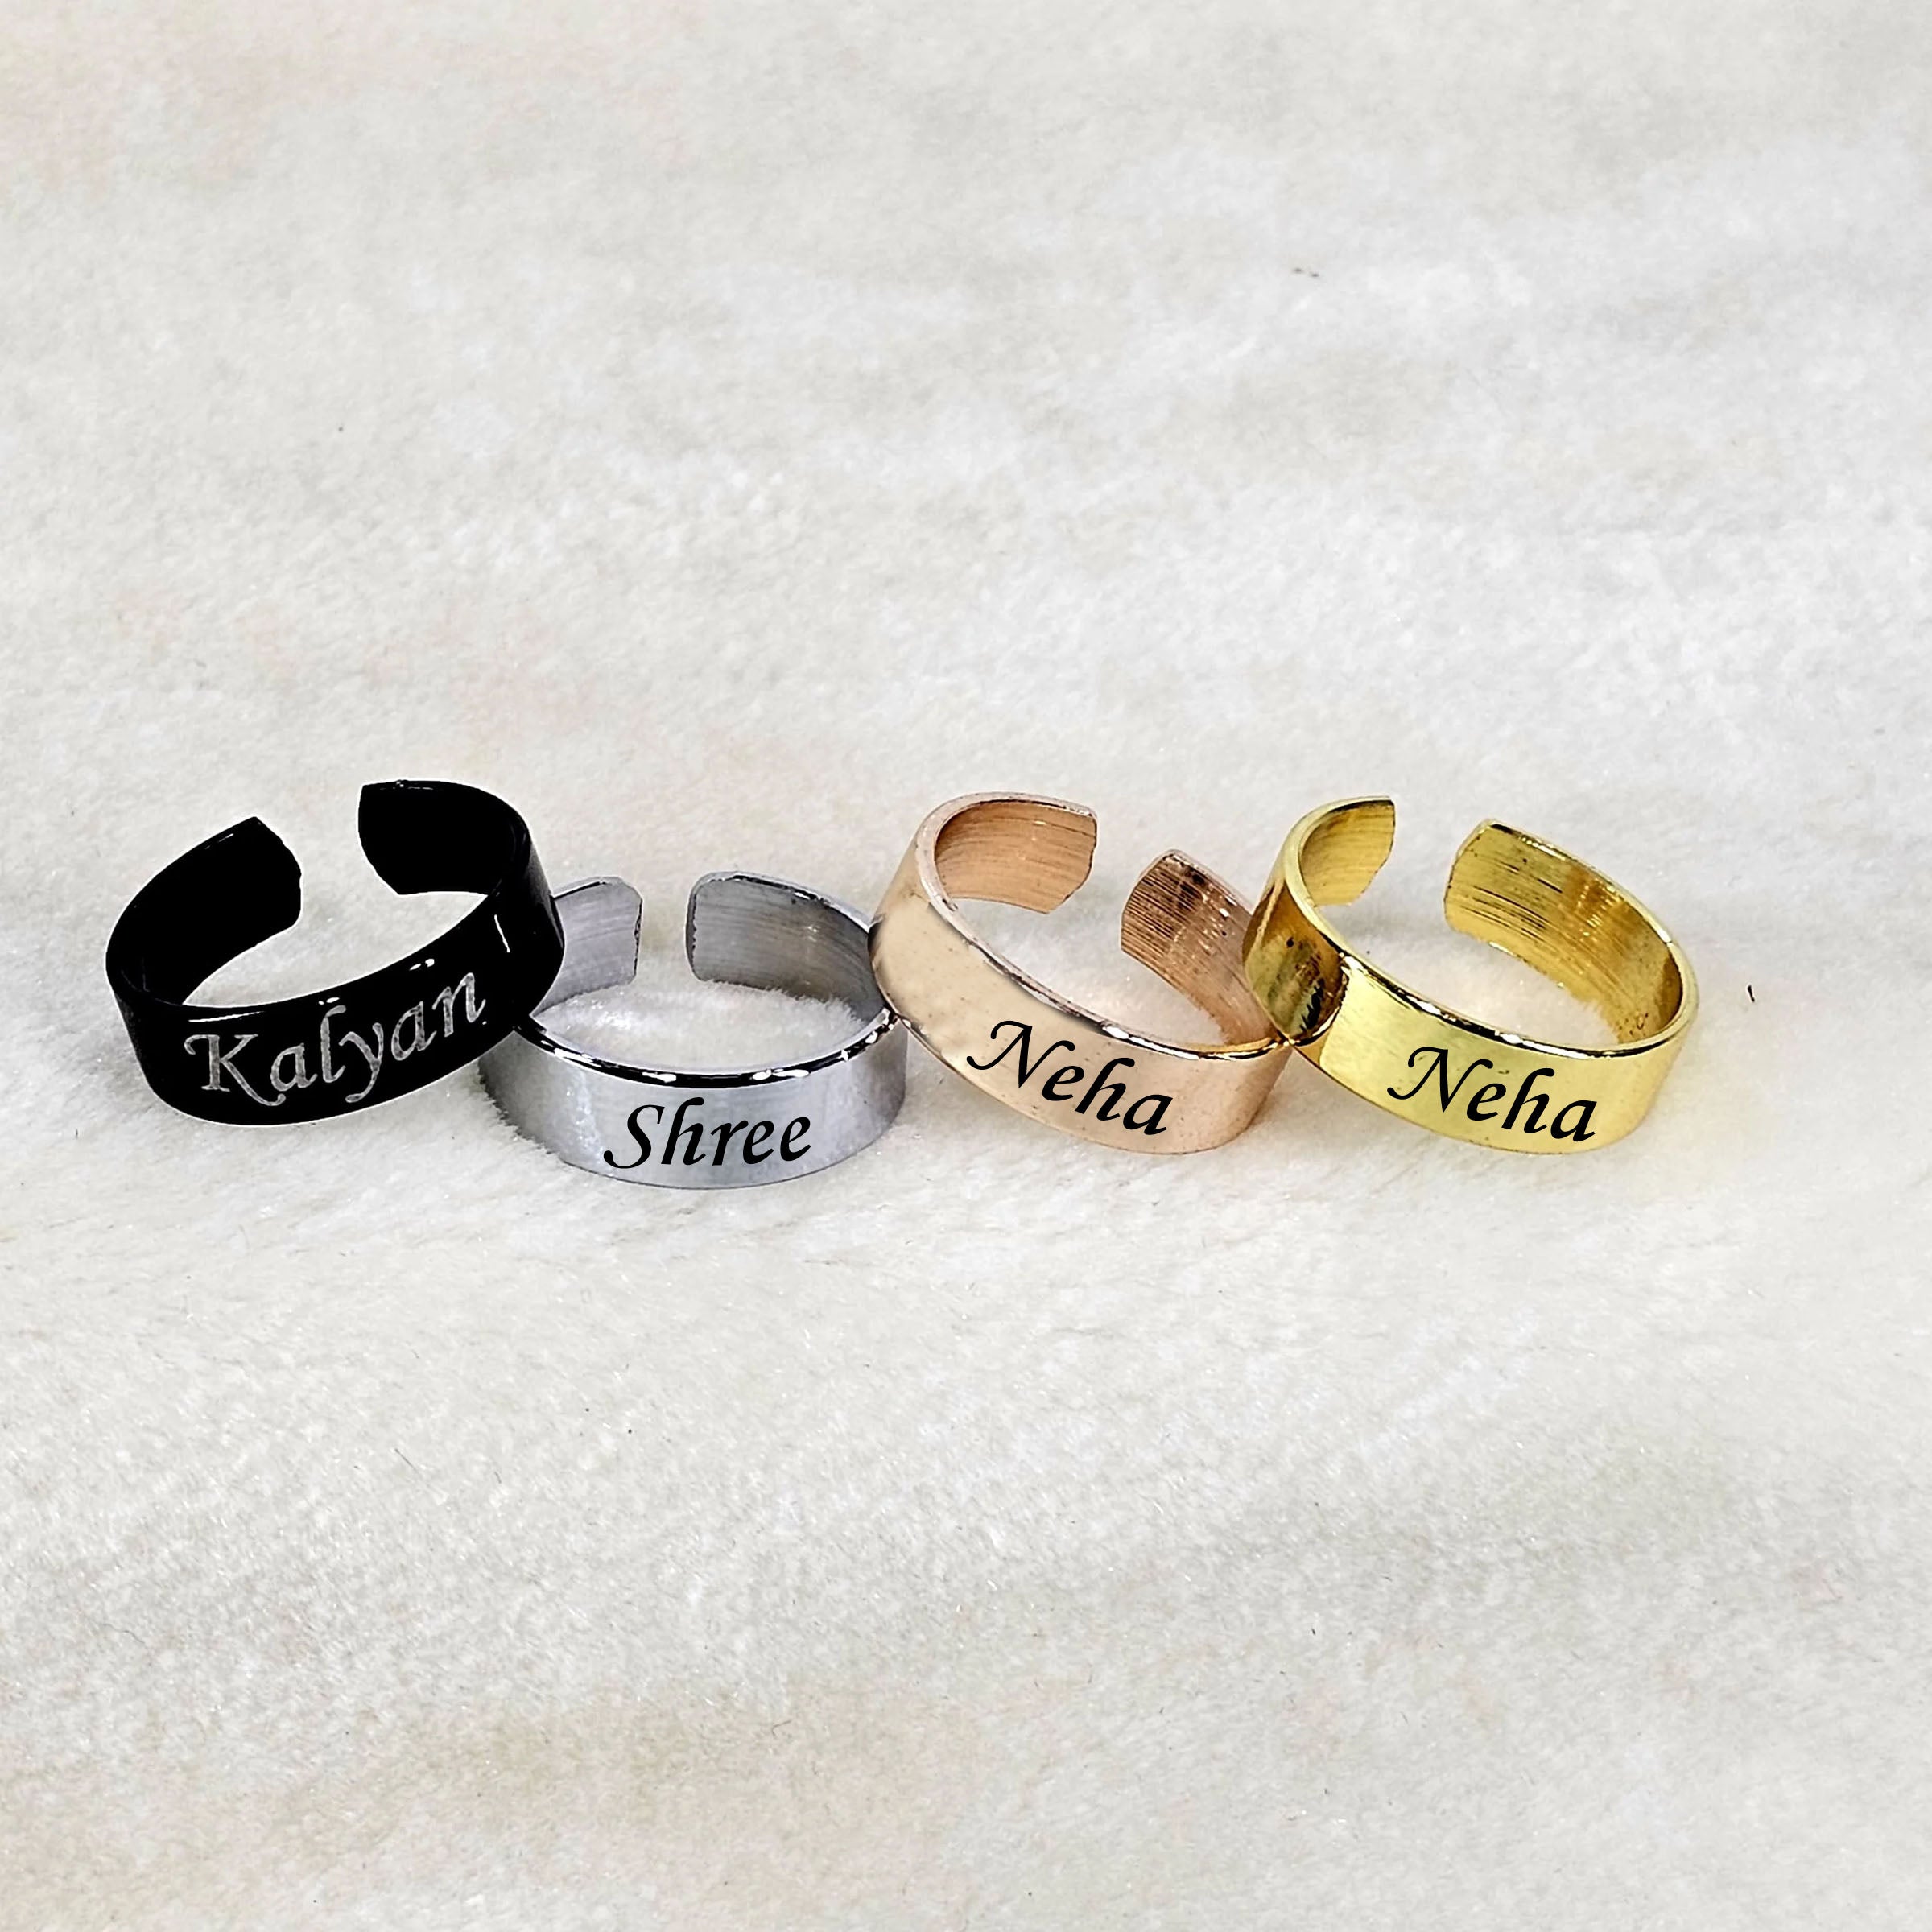 Gold Plated Name Ring: Celebrity